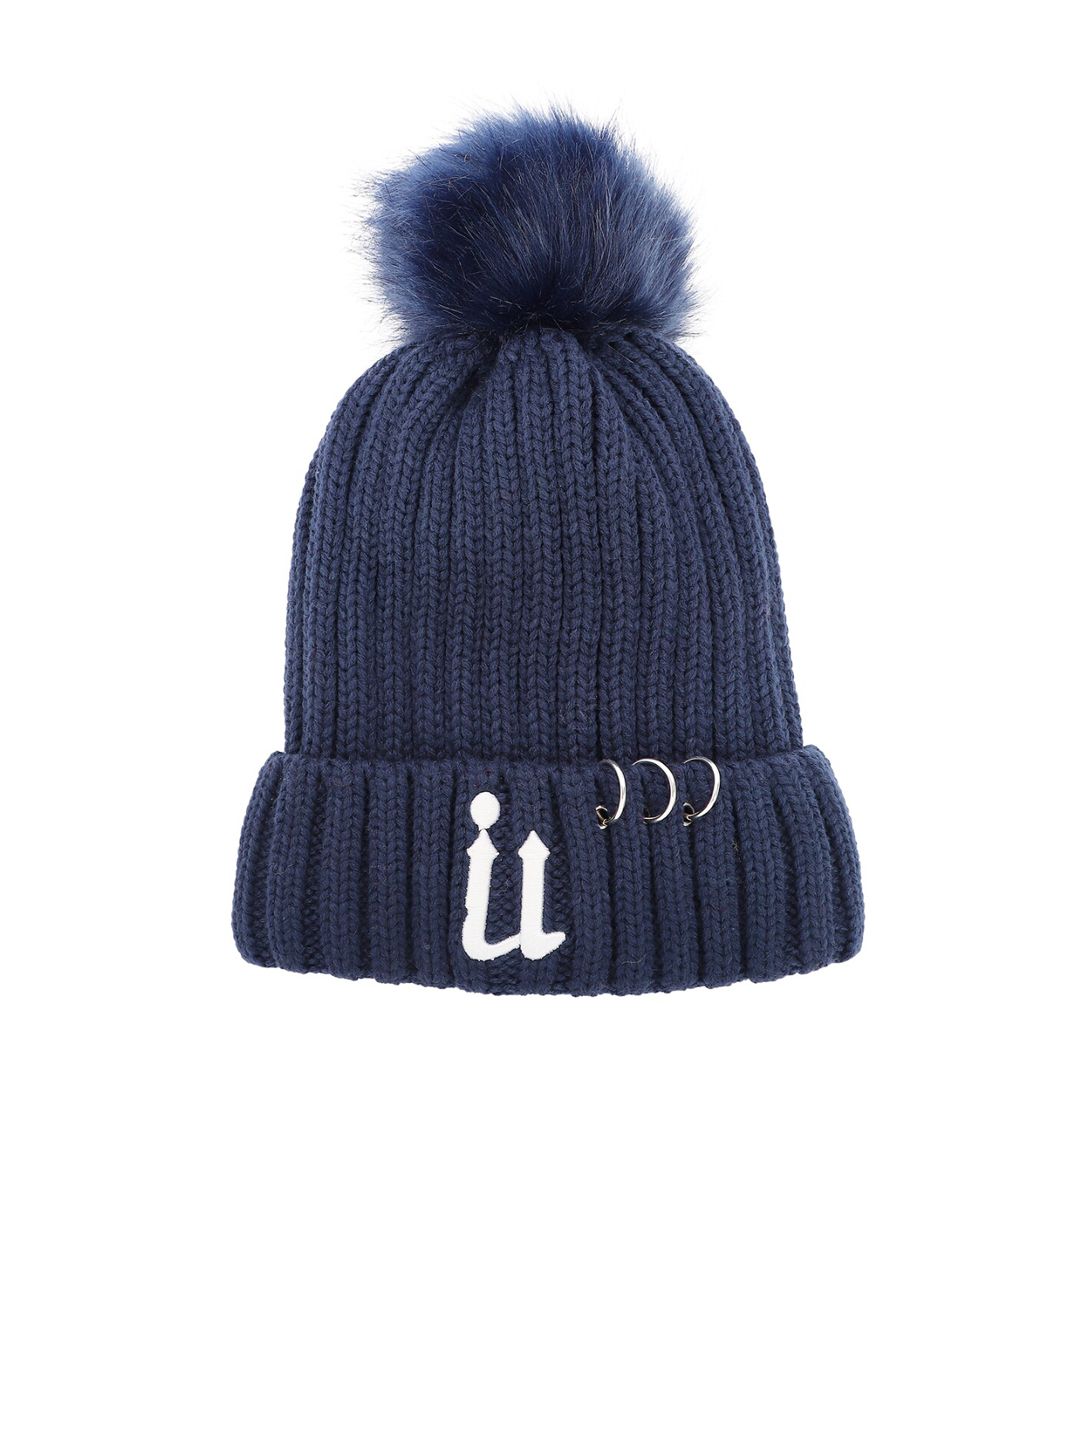 iSWEVEN Unisex Blue Self Design Beanie Price in India